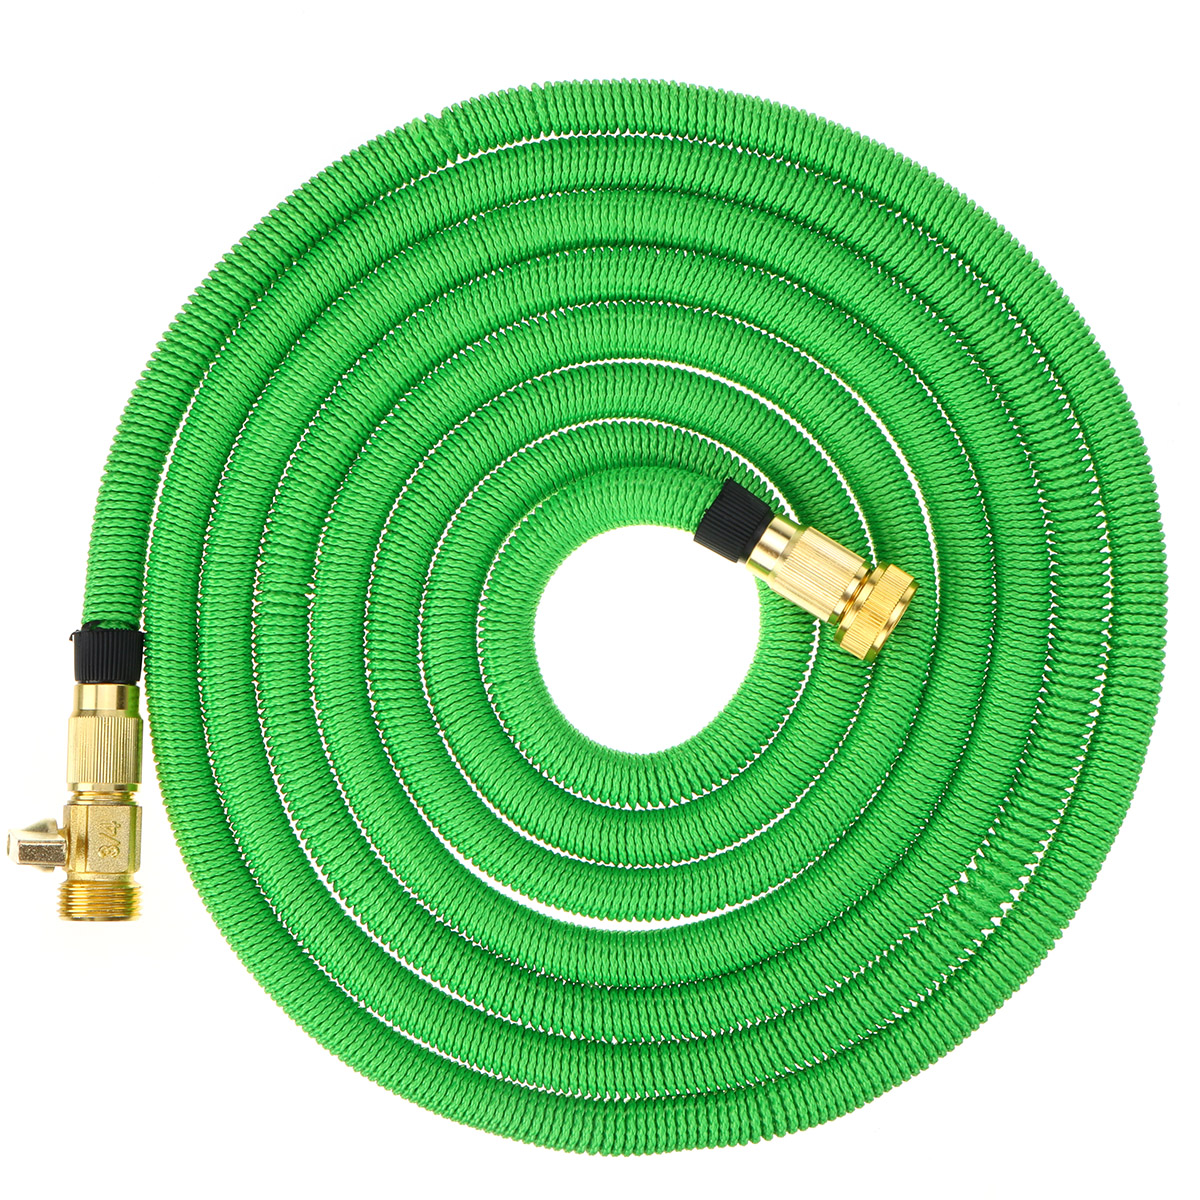 20/50/75/100FT Expandable Garden Water Hose Flexible Latex Tube US Pipe Watering